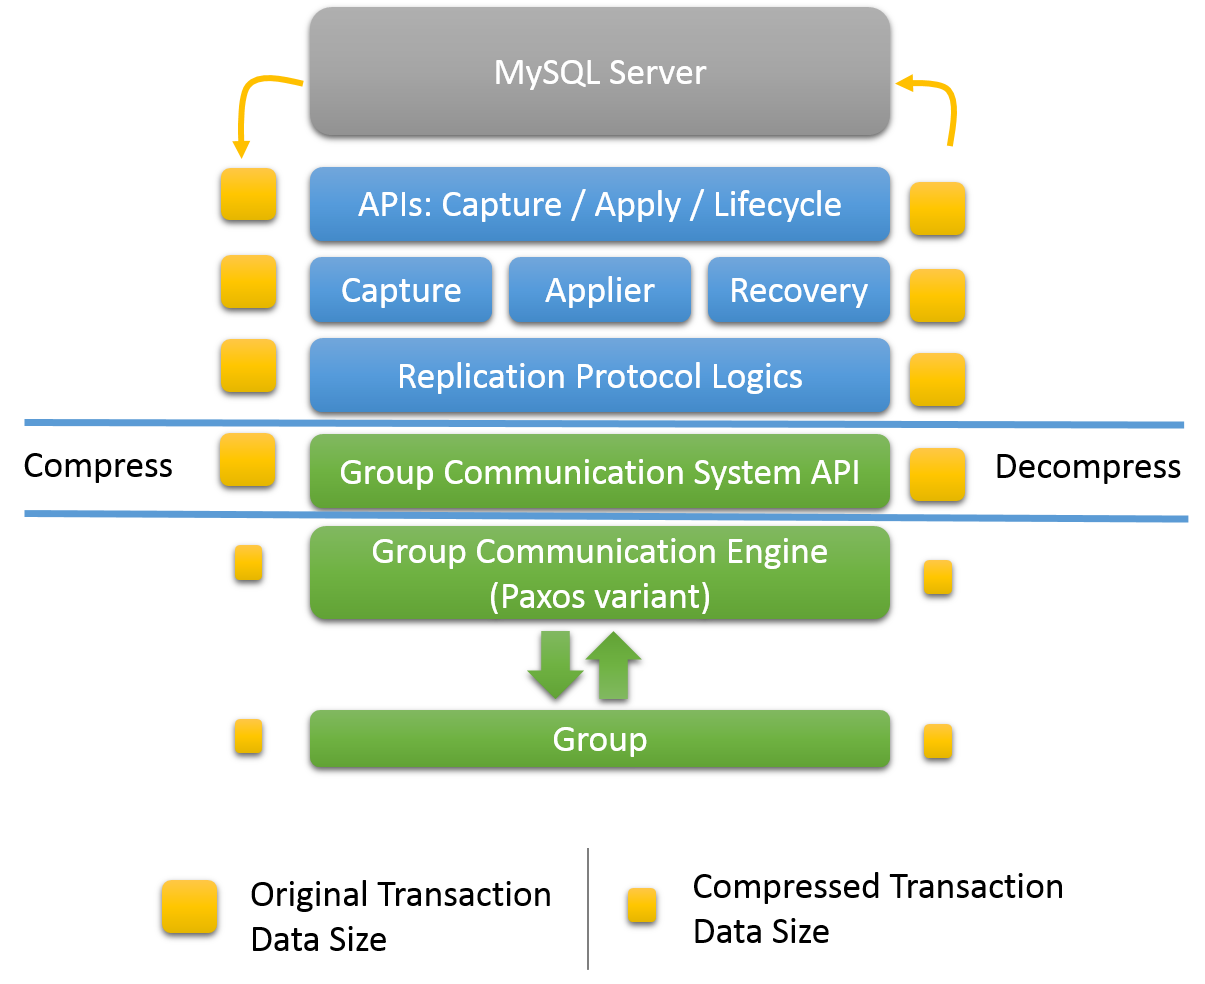 Compression Support in the Group Communication Service